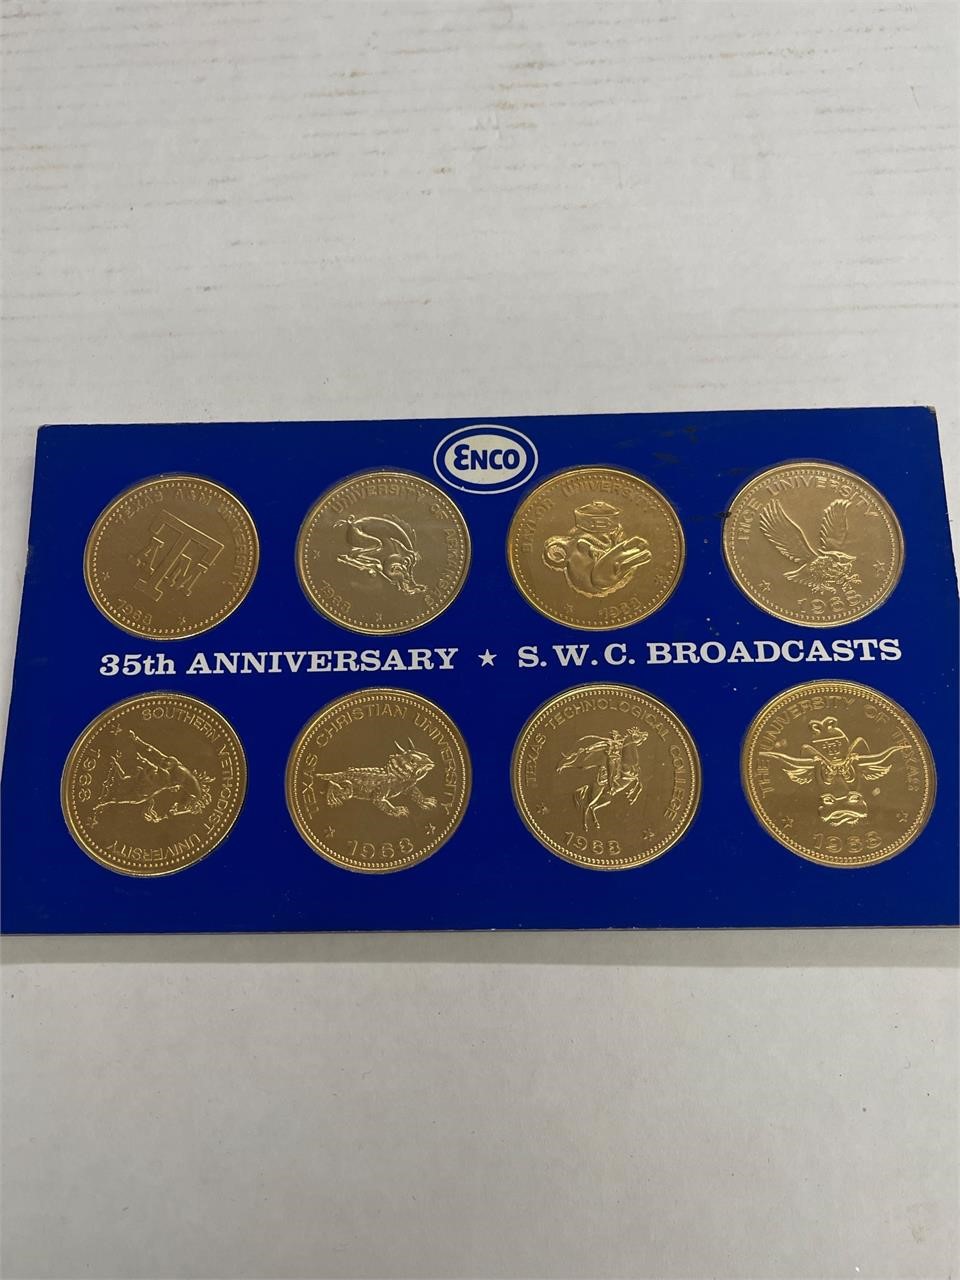 Sealed Enco 35th Anniversary SWC Coins